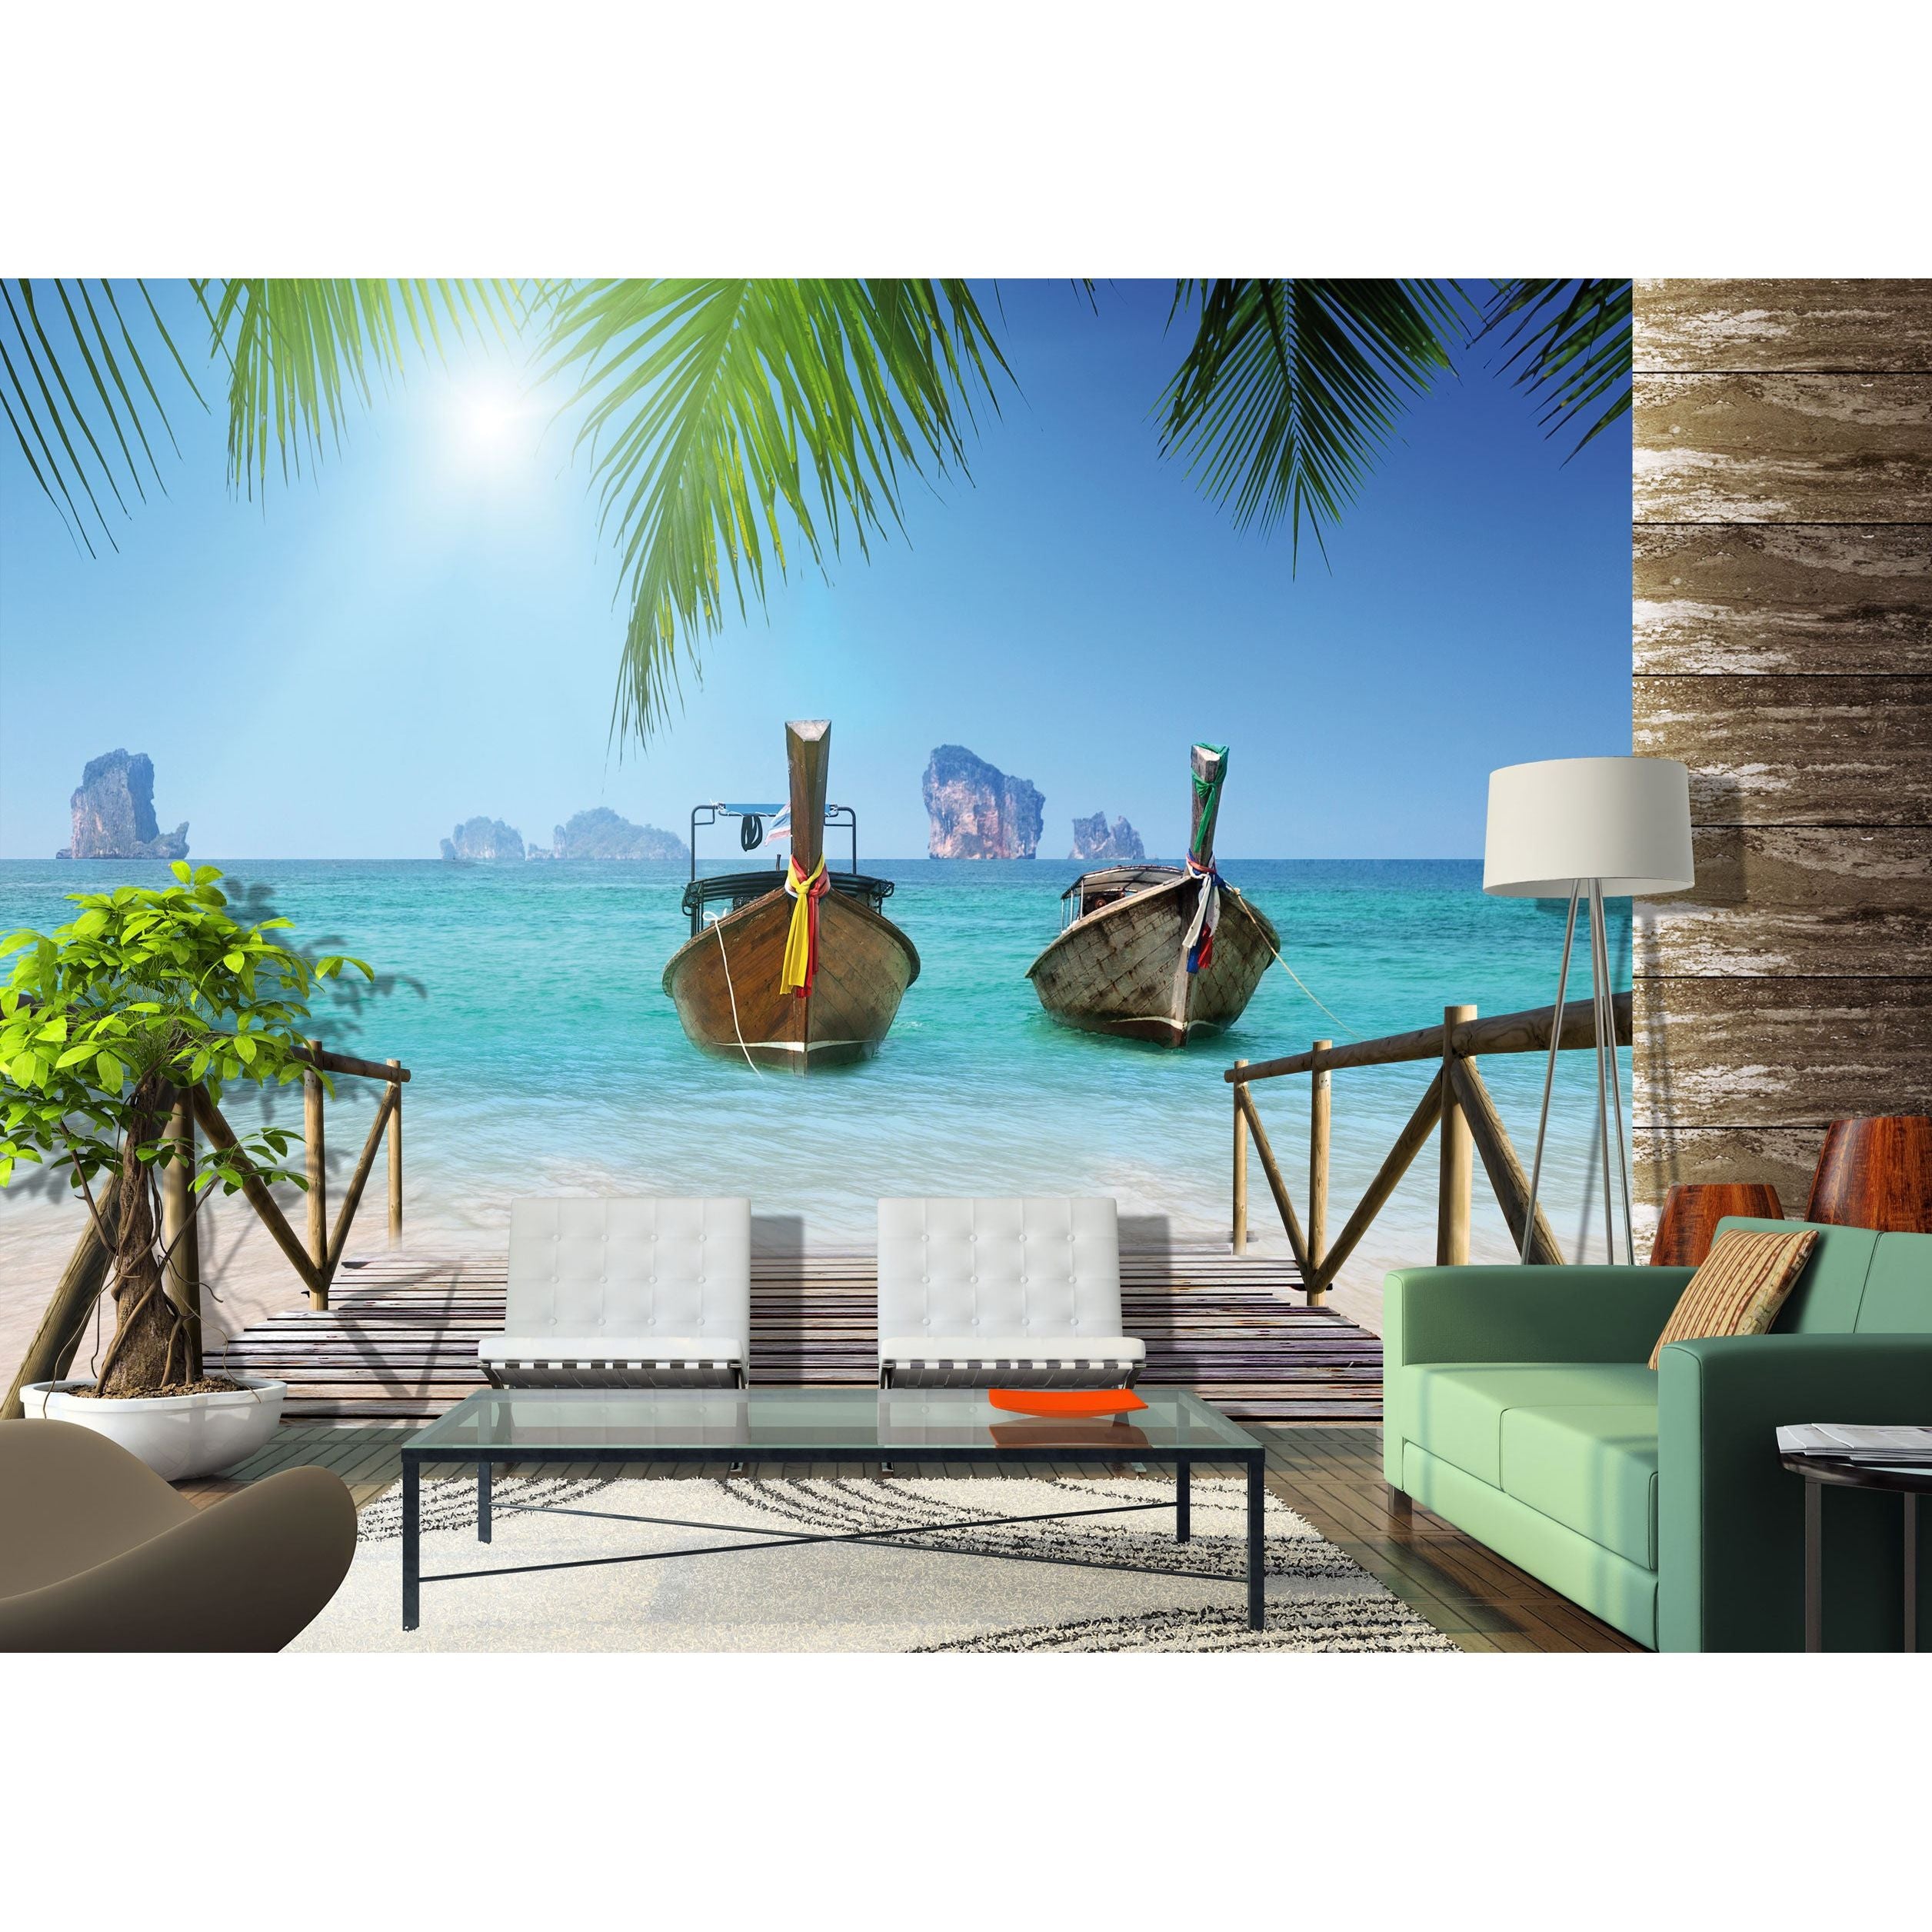 Tropical Bliss: Sun and Boughs Wall Mural